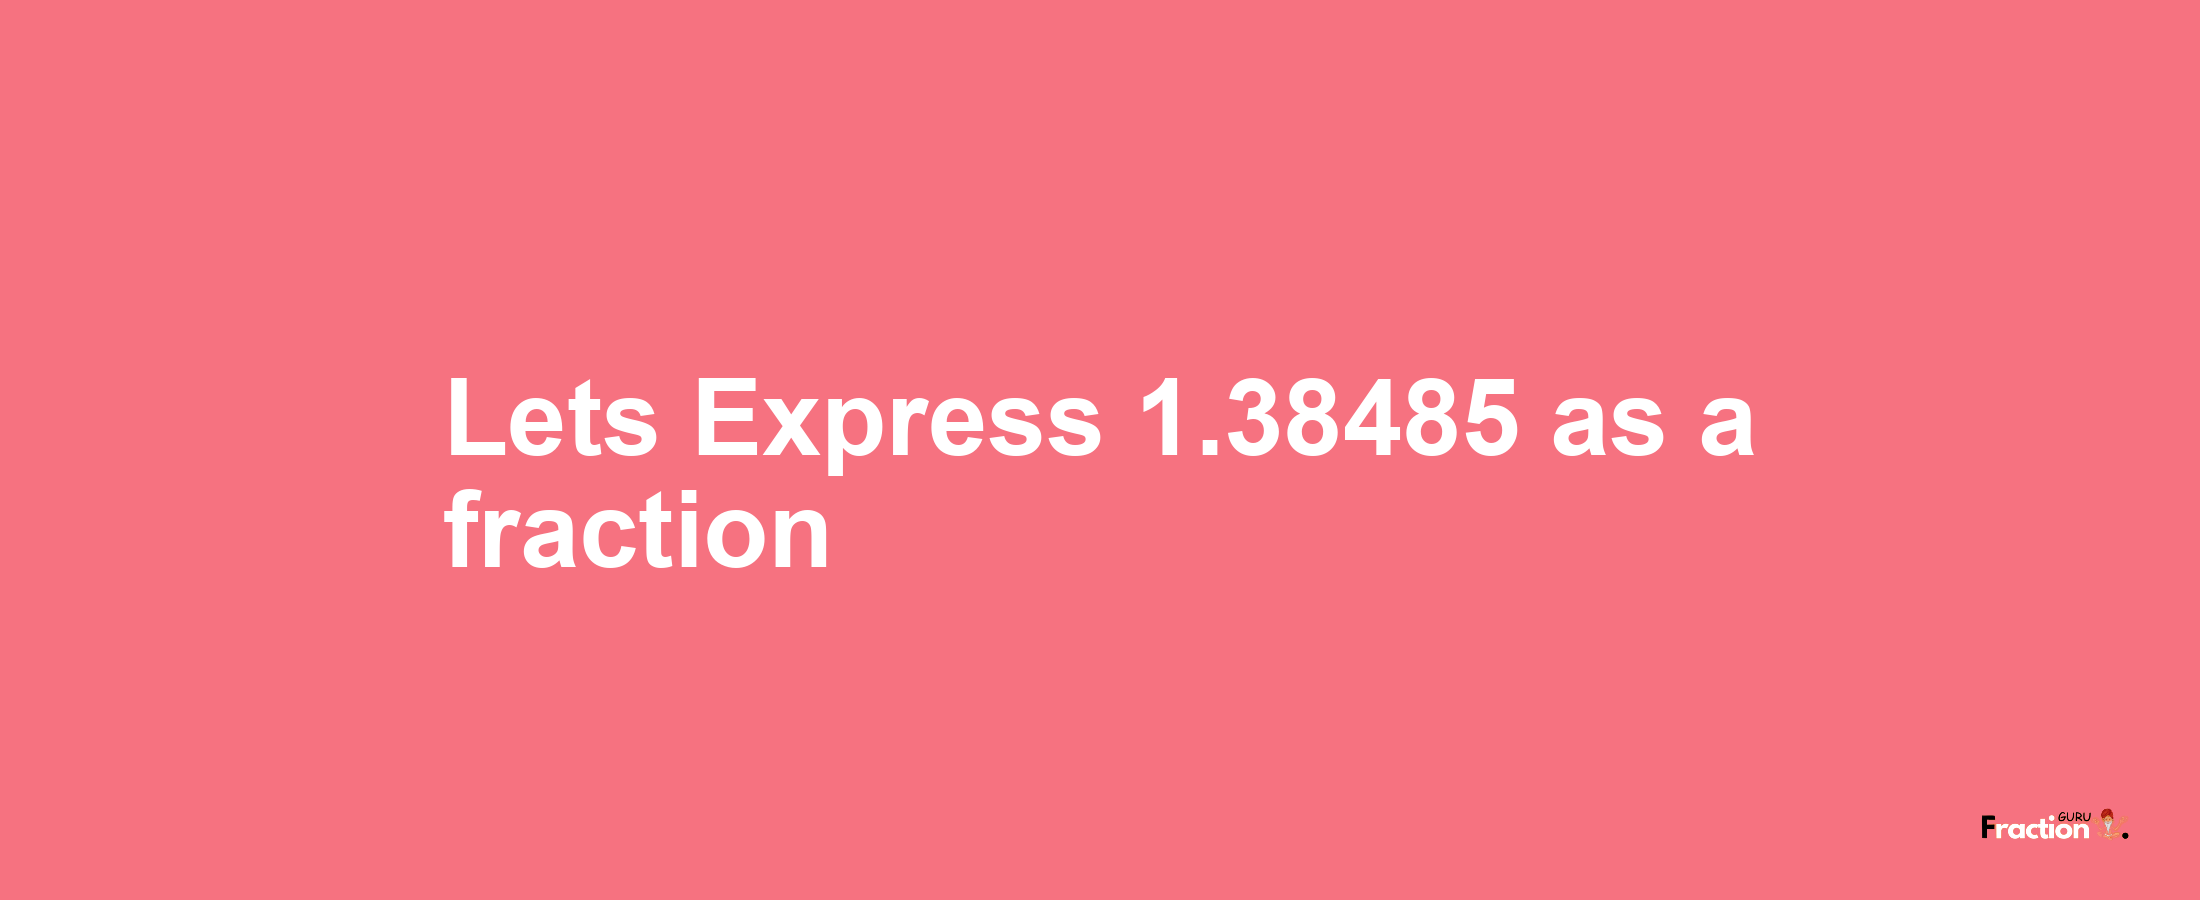 Lets Express 1.38485 as afraction